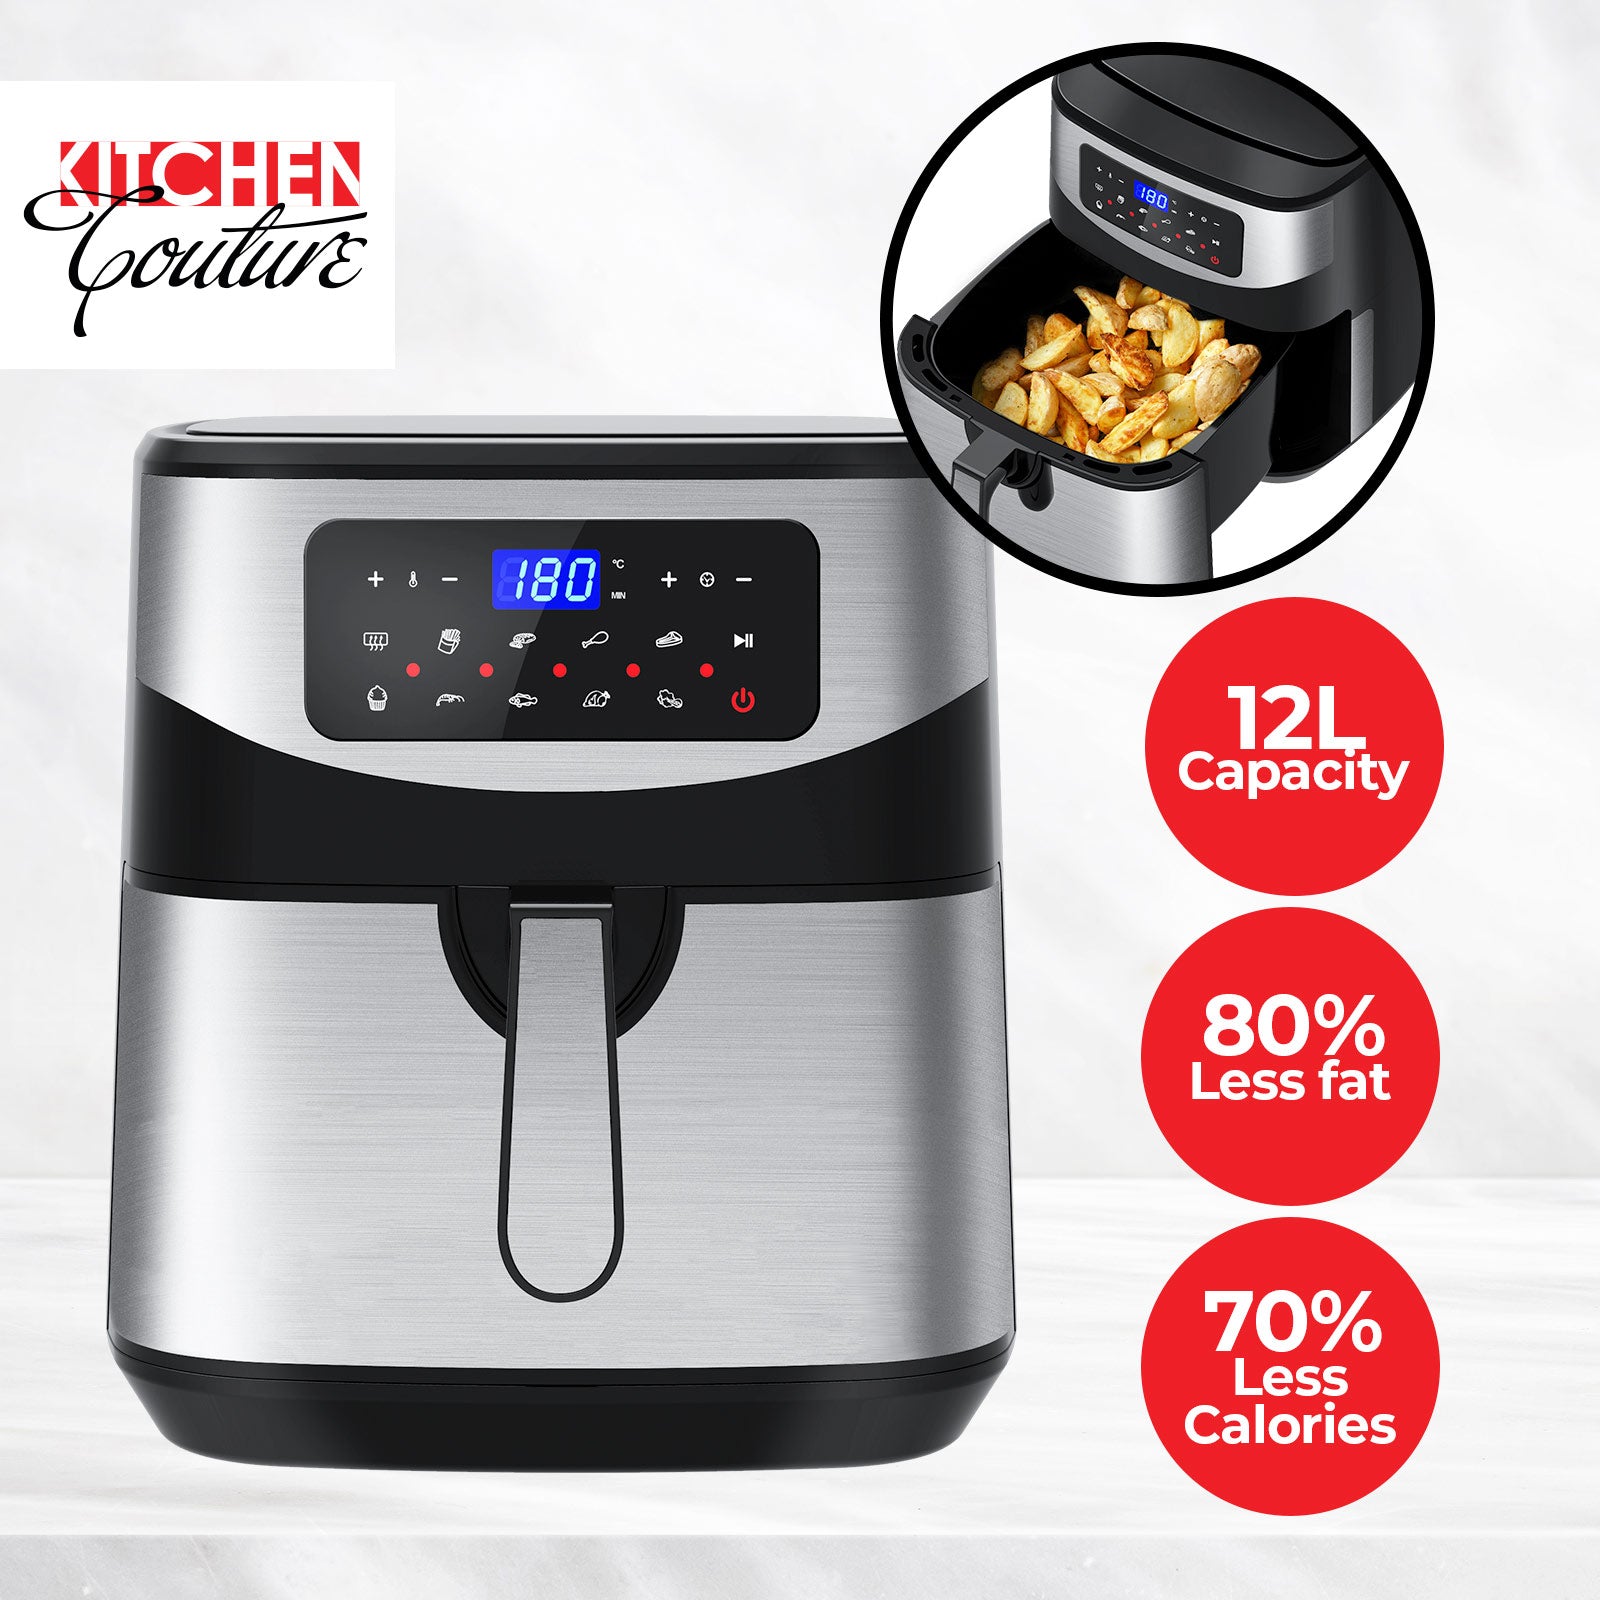 Kitchen Couture 12 Litre Air Fryer Multifunctional LCD One Touch Display-Small Kitchen Appliances-PEROZ Accessories